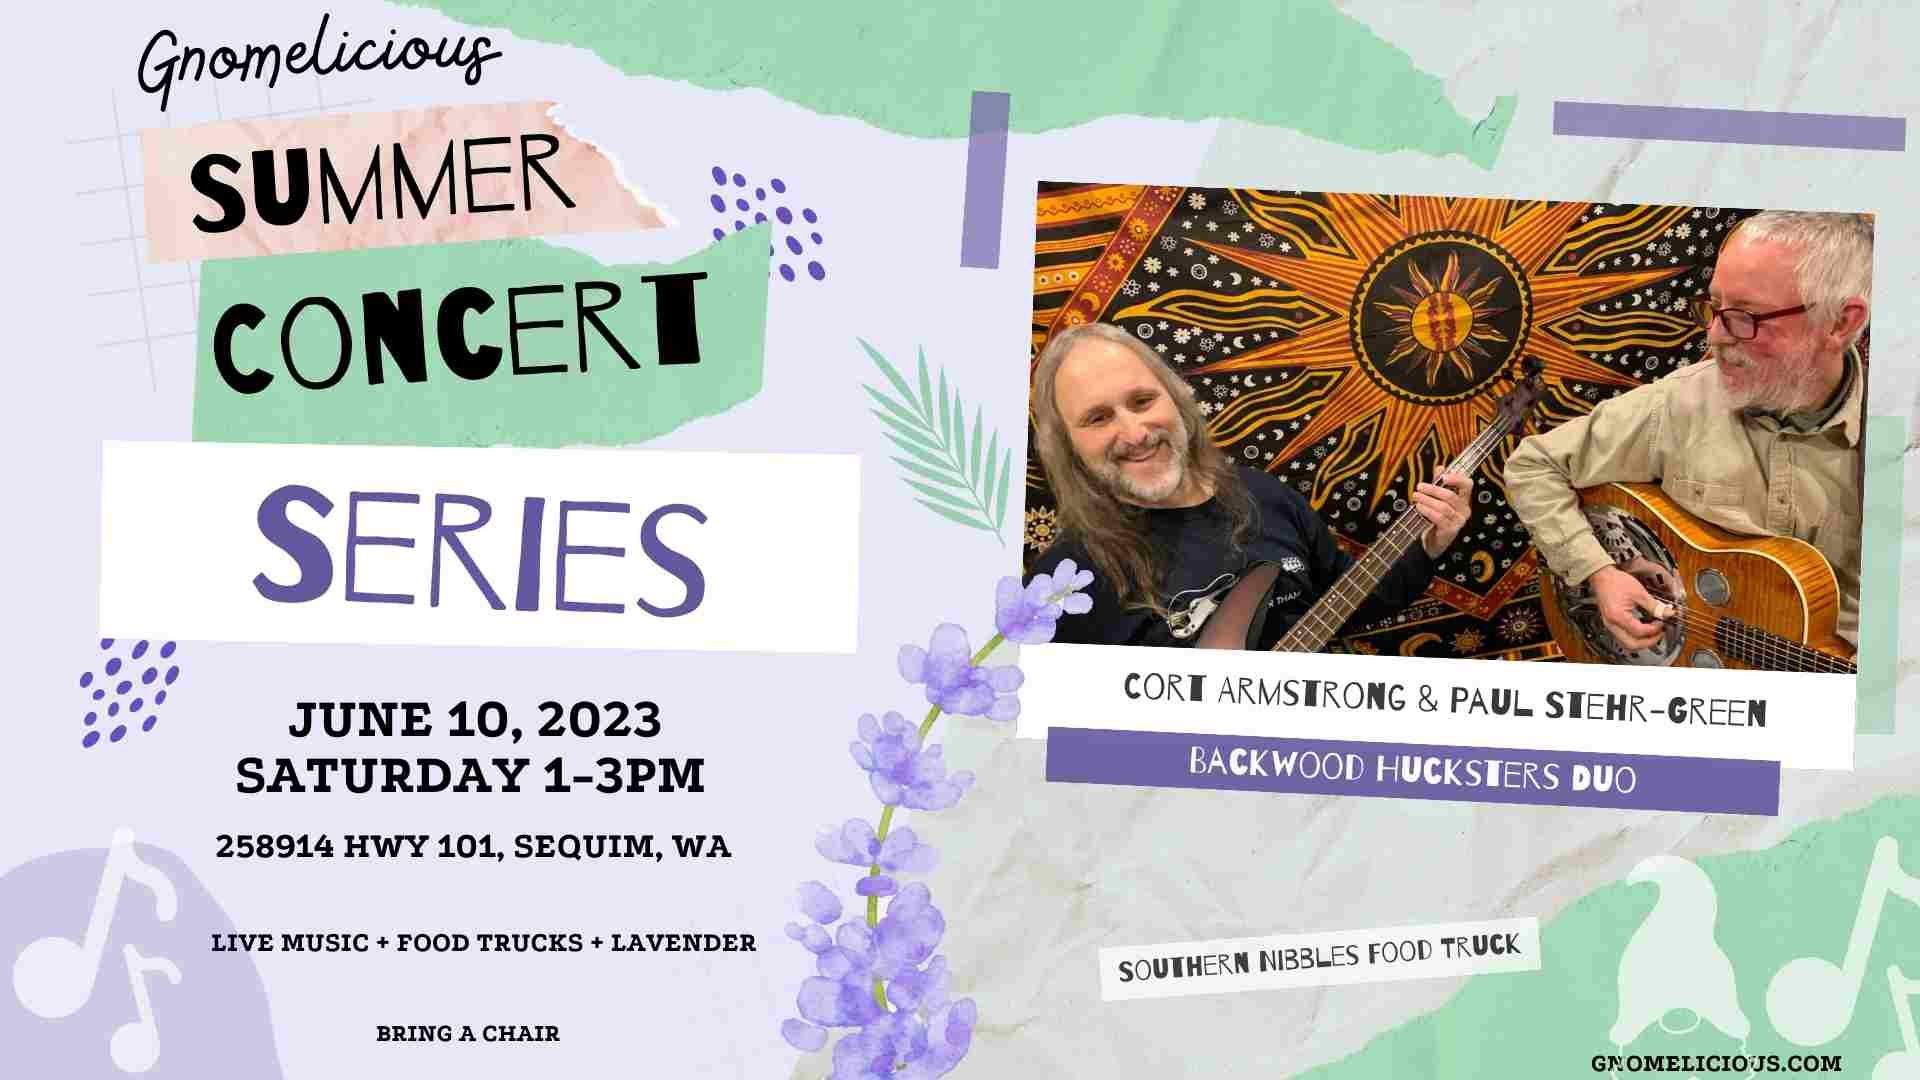 Gnomelicious Lavender Farm Summer Concert Series "Backwood Hucksters Duo"